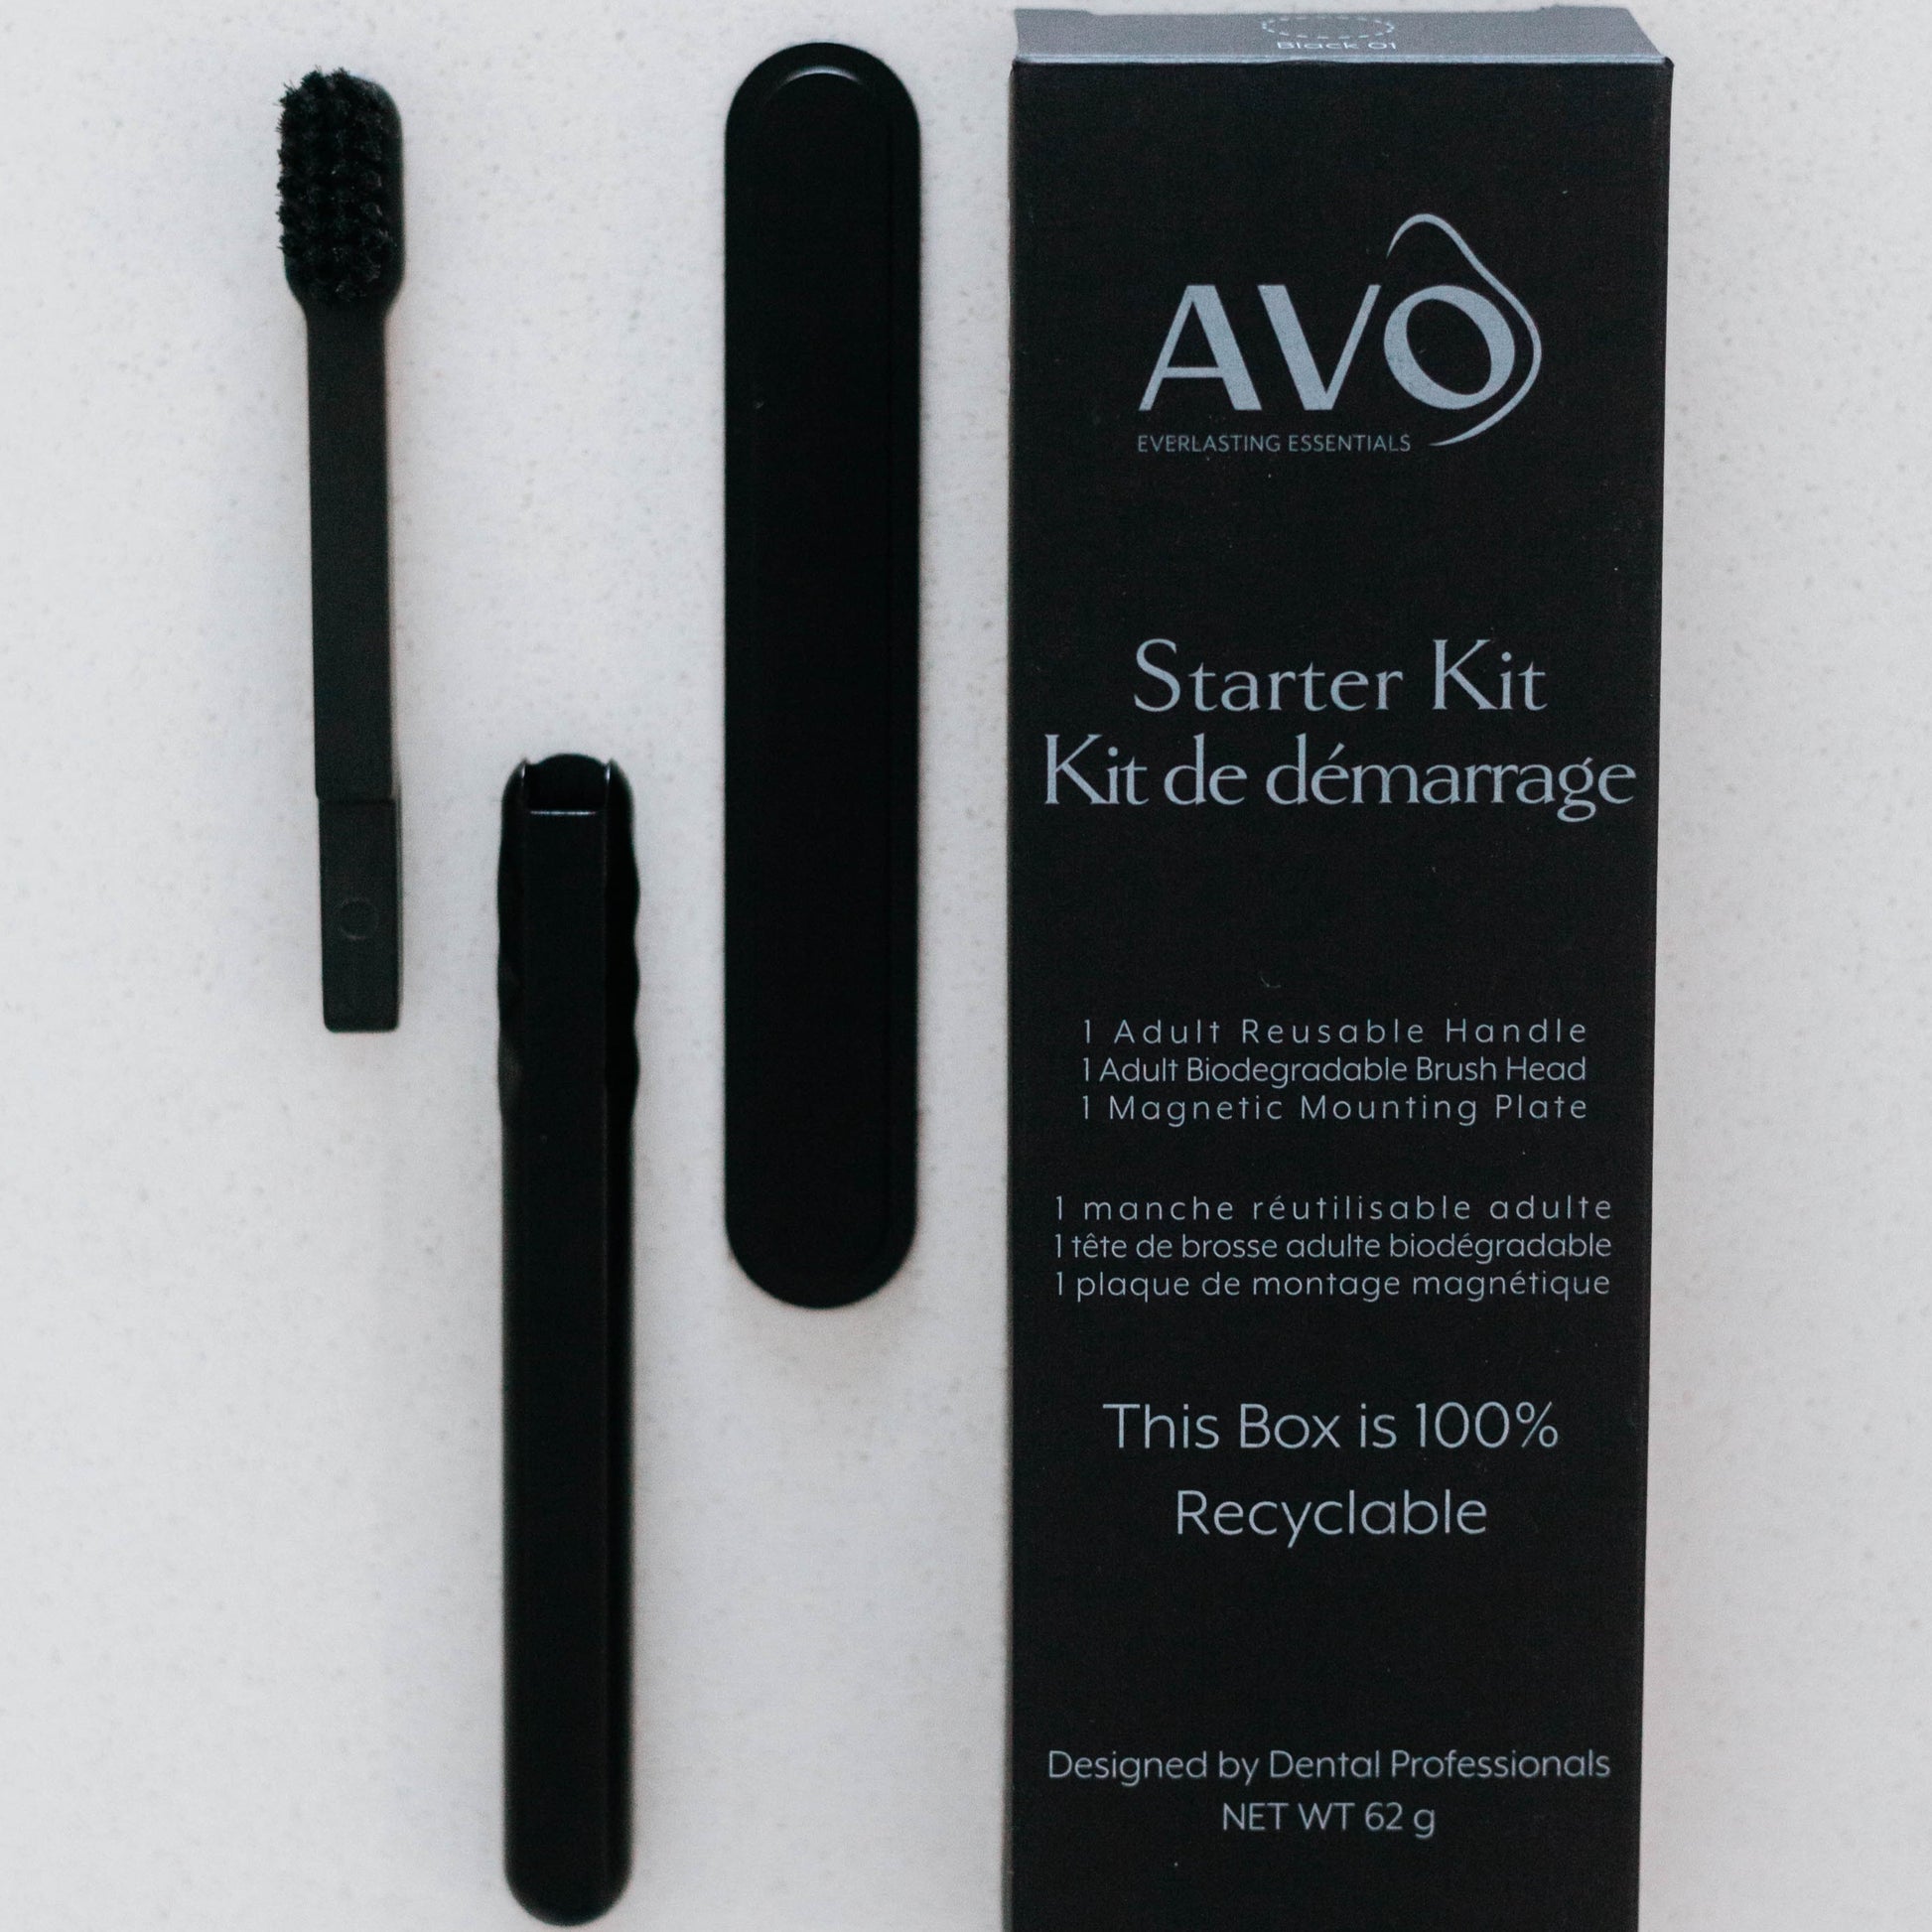 Starter Kit Black Aluminum Brush Handle and Biodegradable Brush presented with Magnetic Strip and Packaging